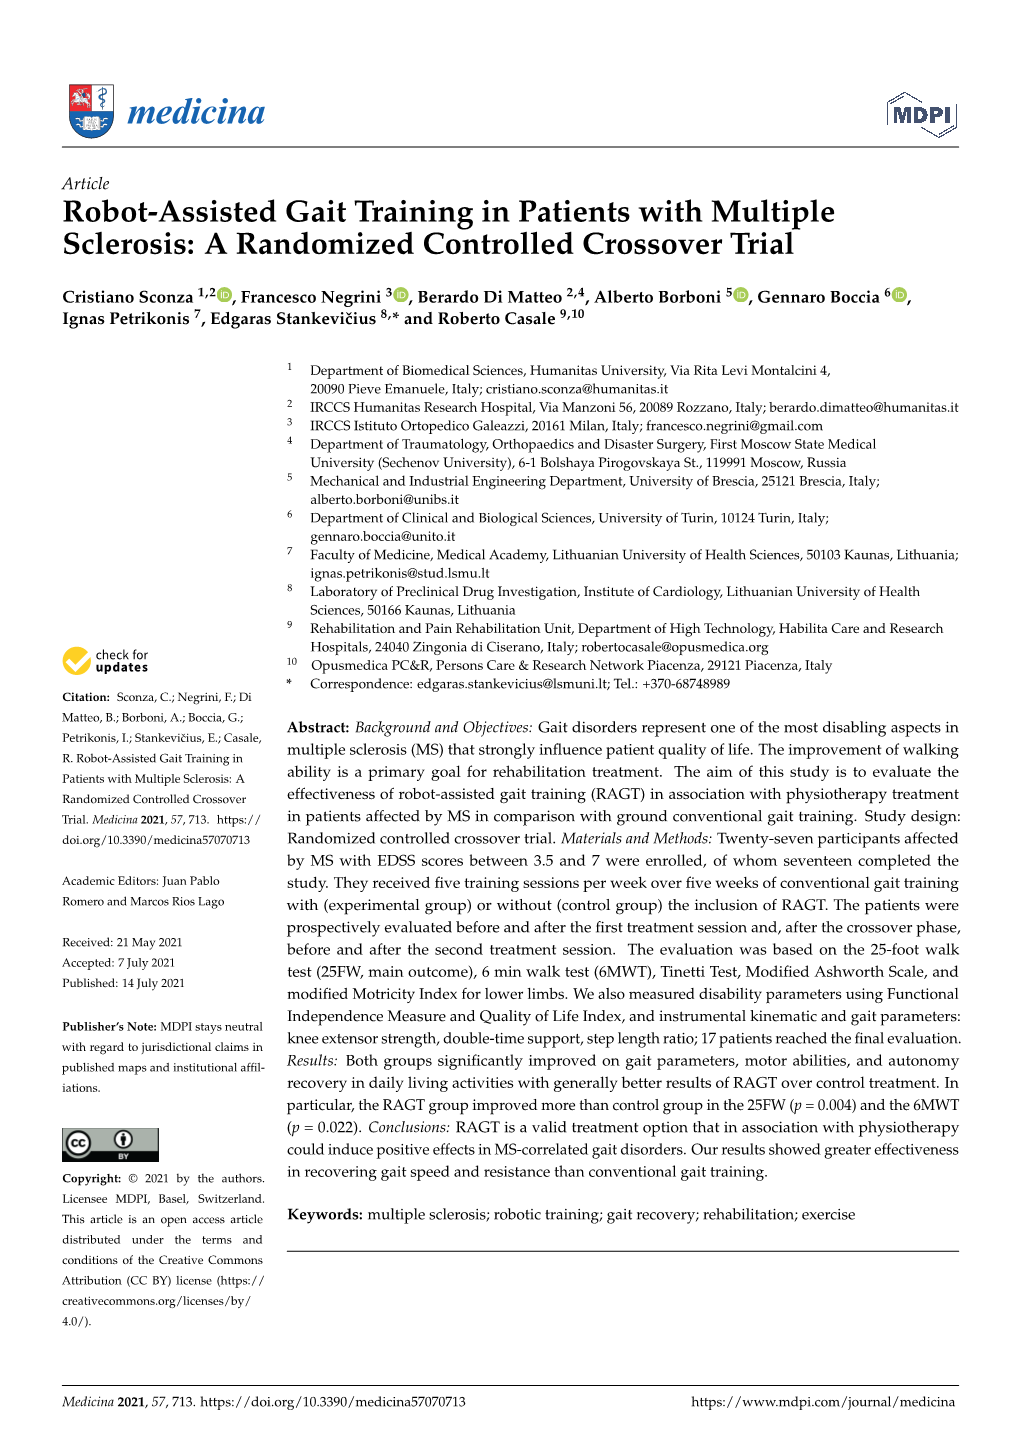 Robot-Assisted Gait Training in Patients with Multiple Sclerosis: a Randomized Controlled Crossover Trial